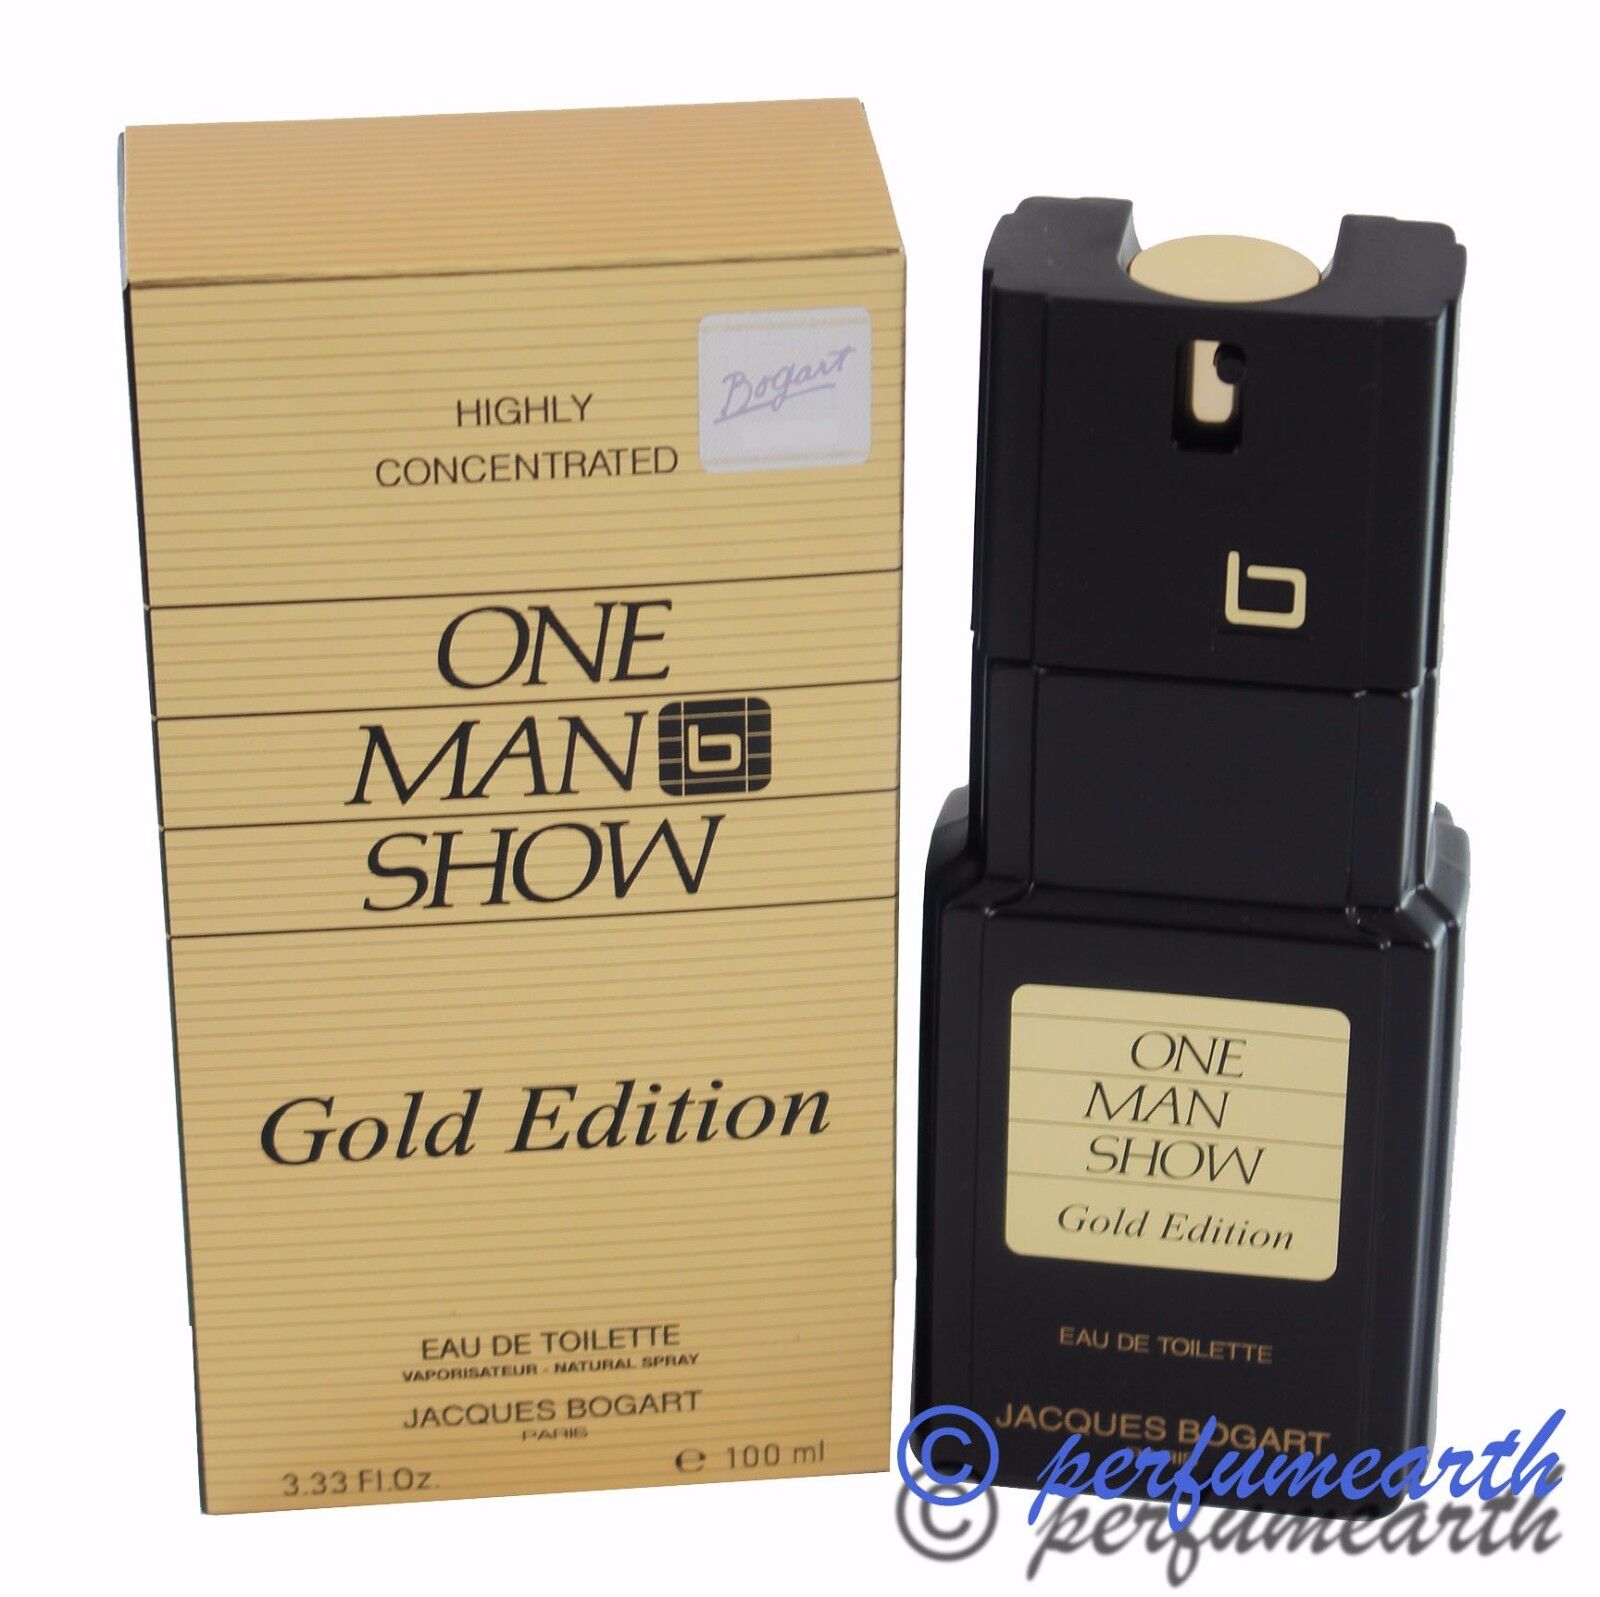 ONE MAN SHOW GOLD EDITION 3.3/3.4 / OZ EDT SPRAY BY JACQUES BOGART NEW IN BOX  